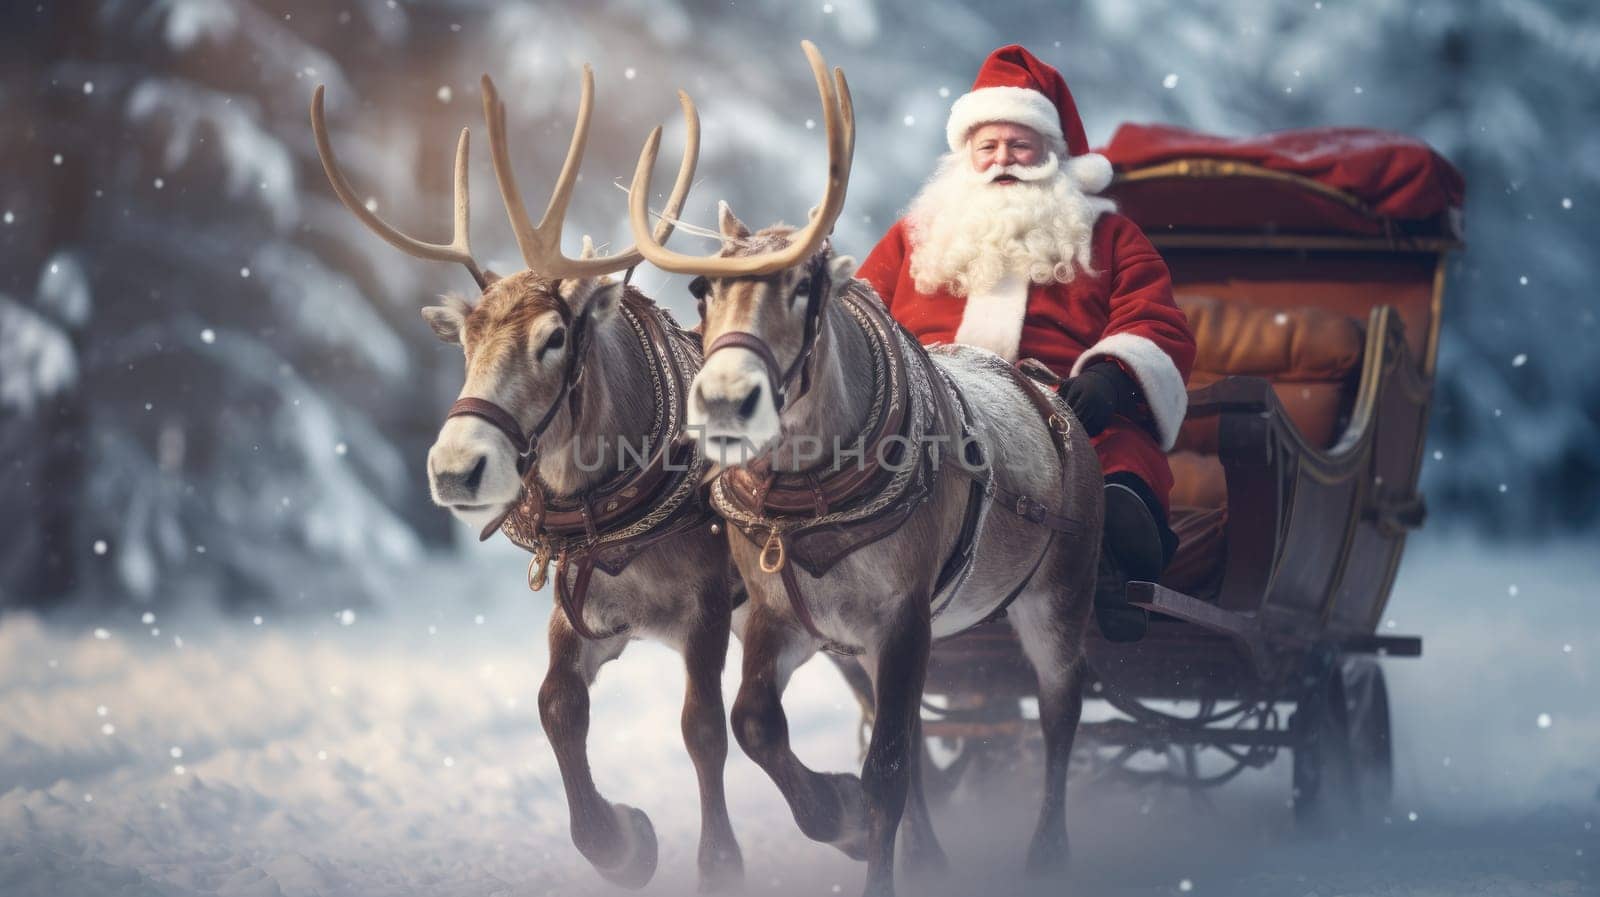 Santa Claus and his sleigh and reindeers by palinchak